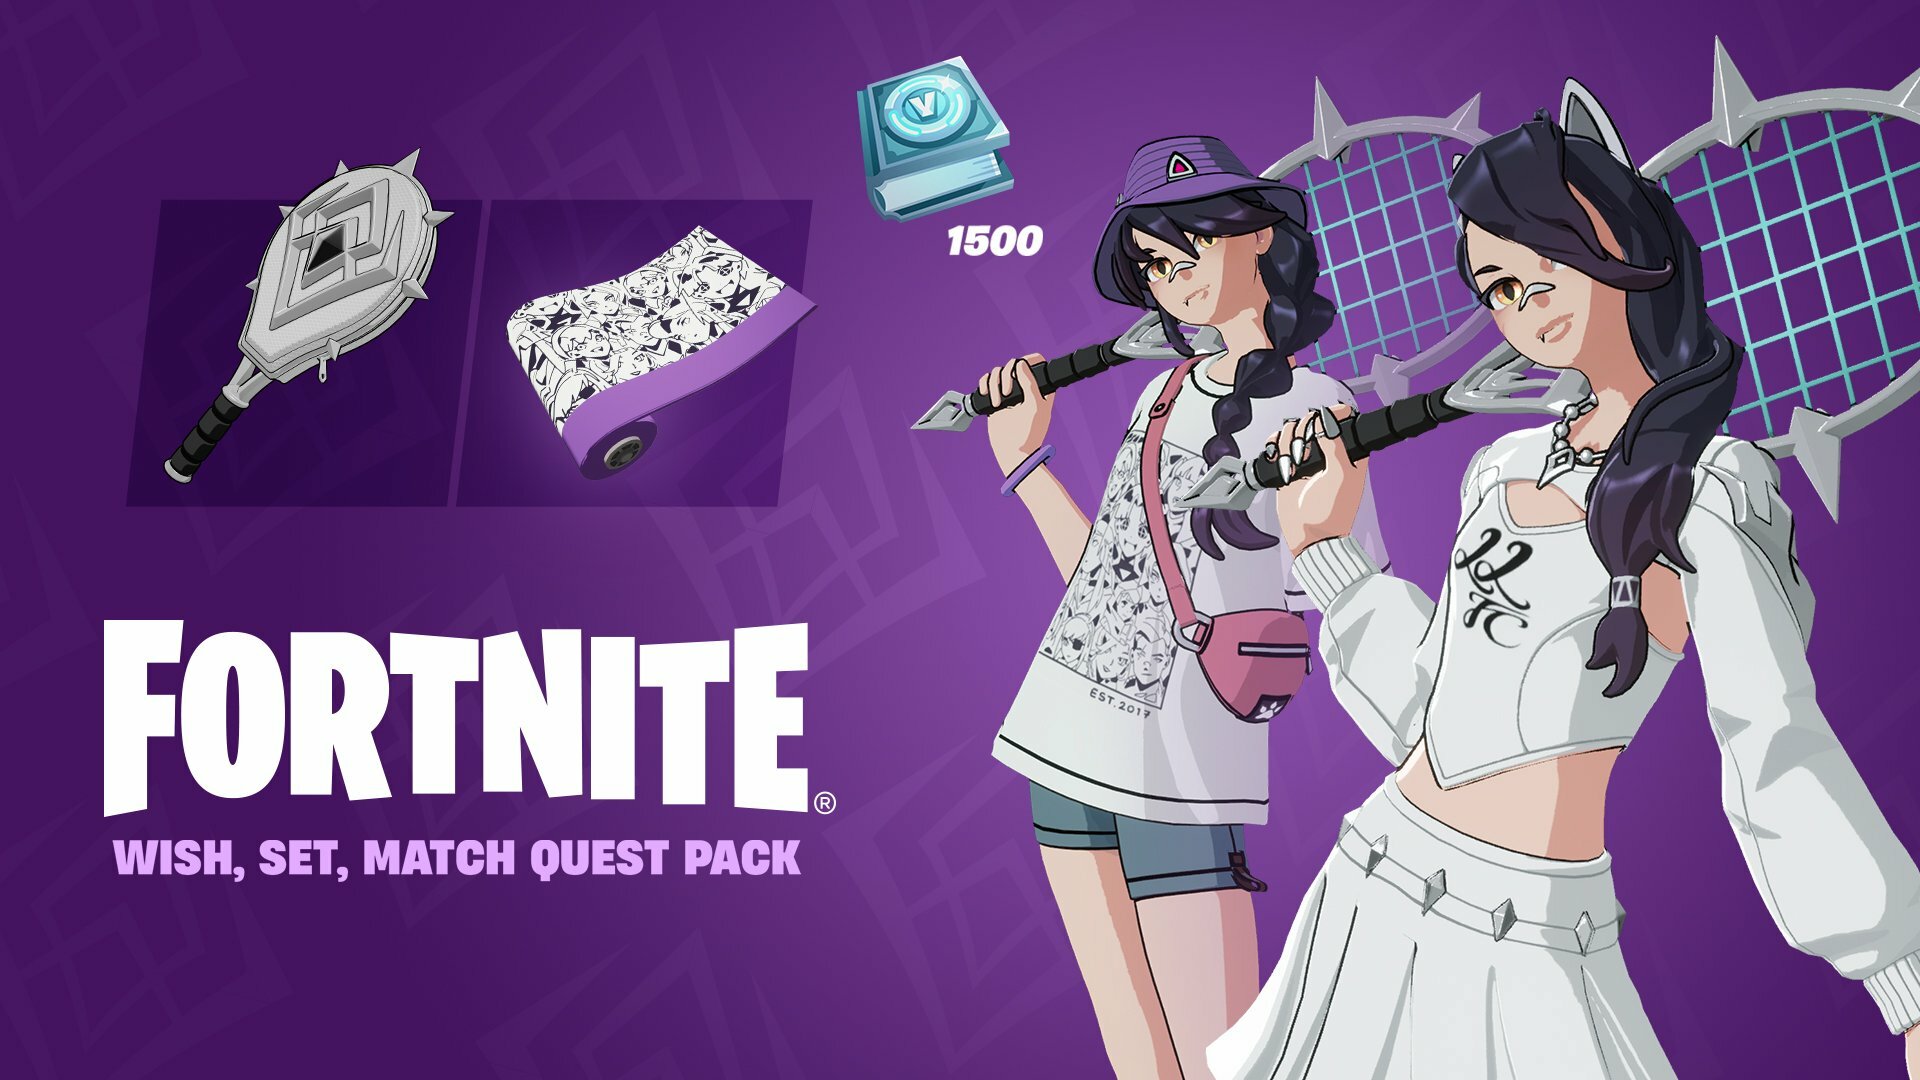 Wish Set Match Quests Pack in Fortnite